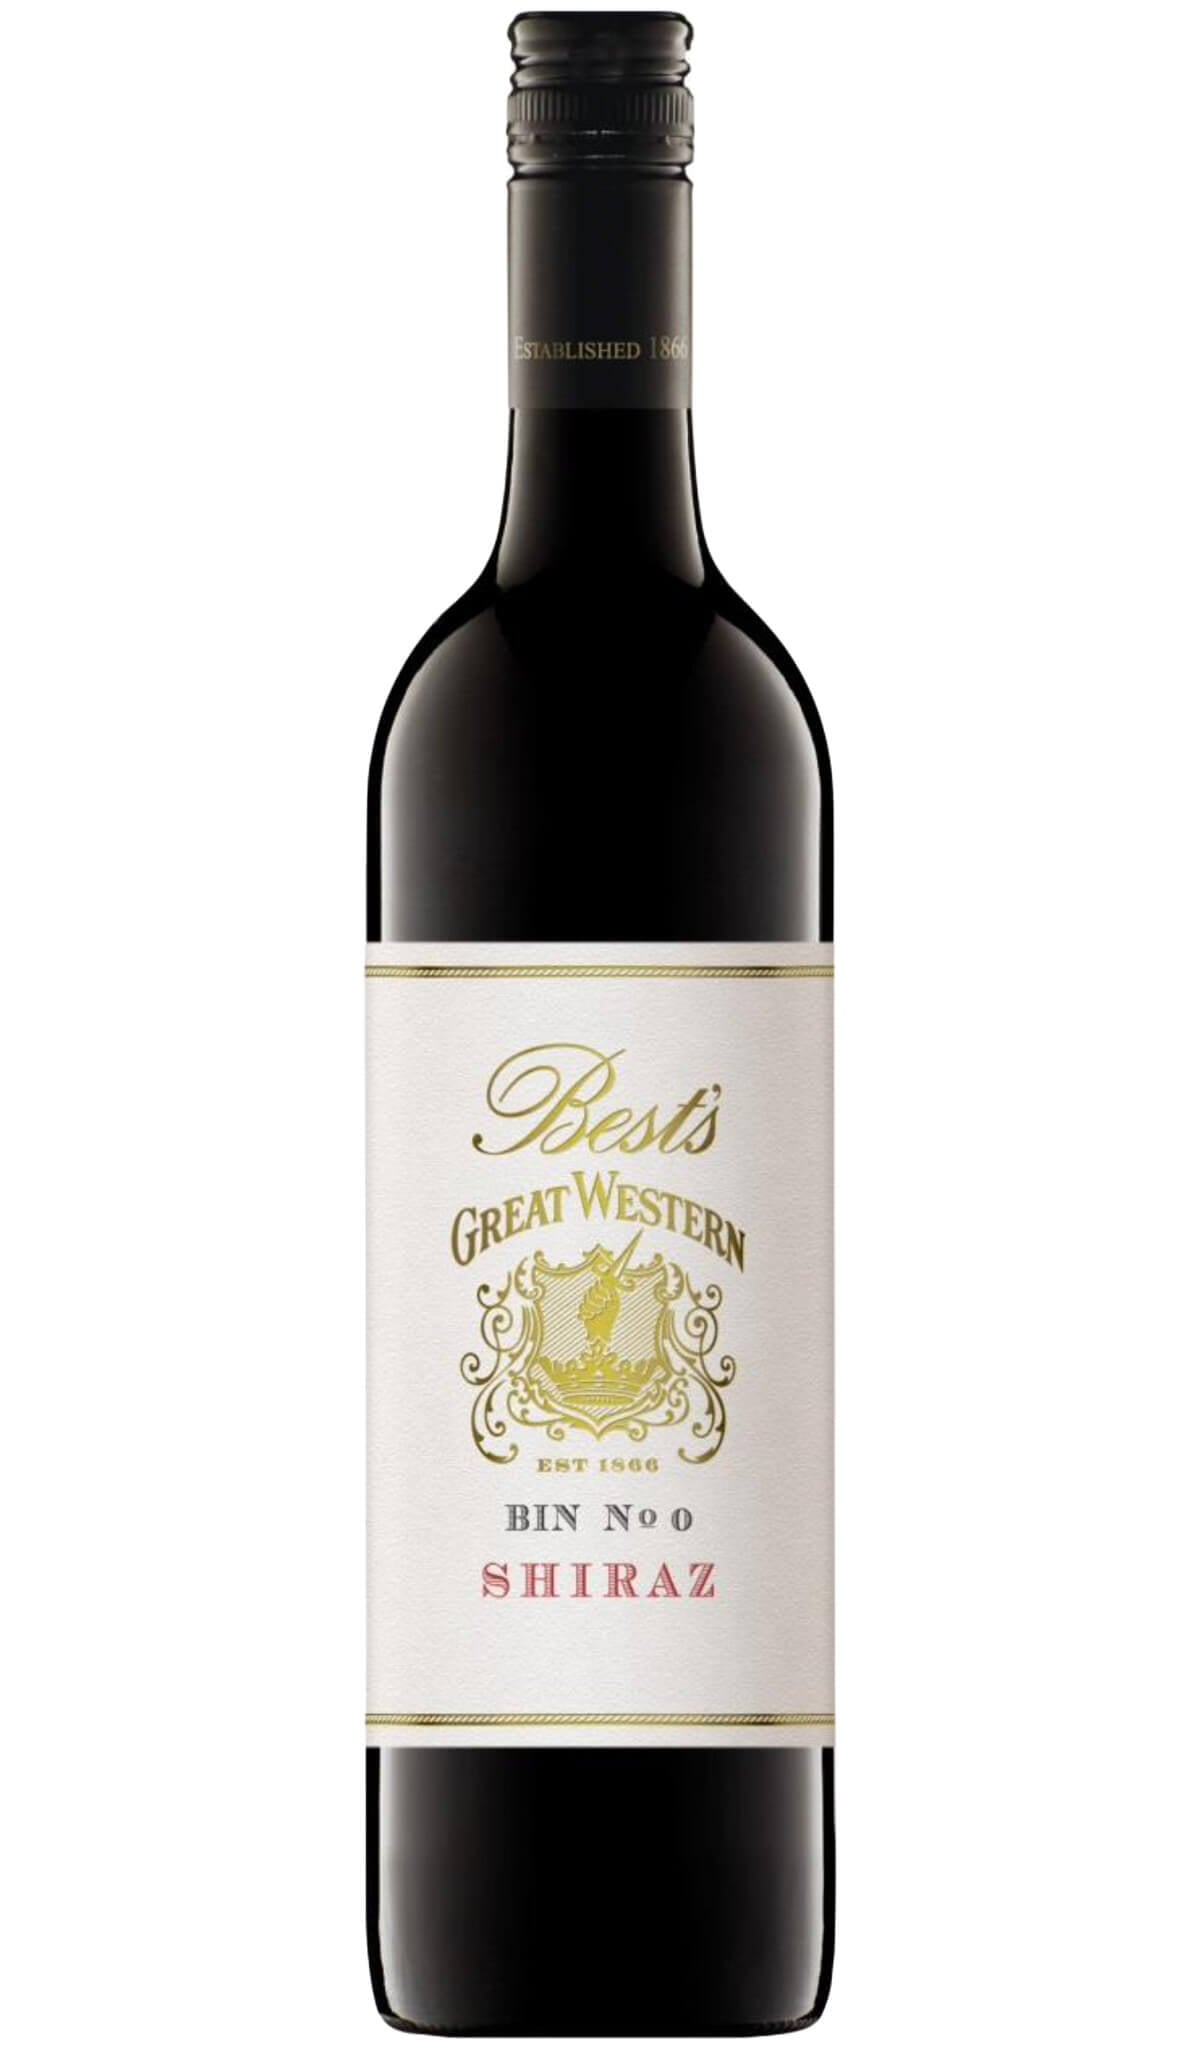 Find out more or buy Best's Great Western Bin No. 0 Shiraz 2019 online at Wine Sellers Direct - Australia’s independent liquor specialists.